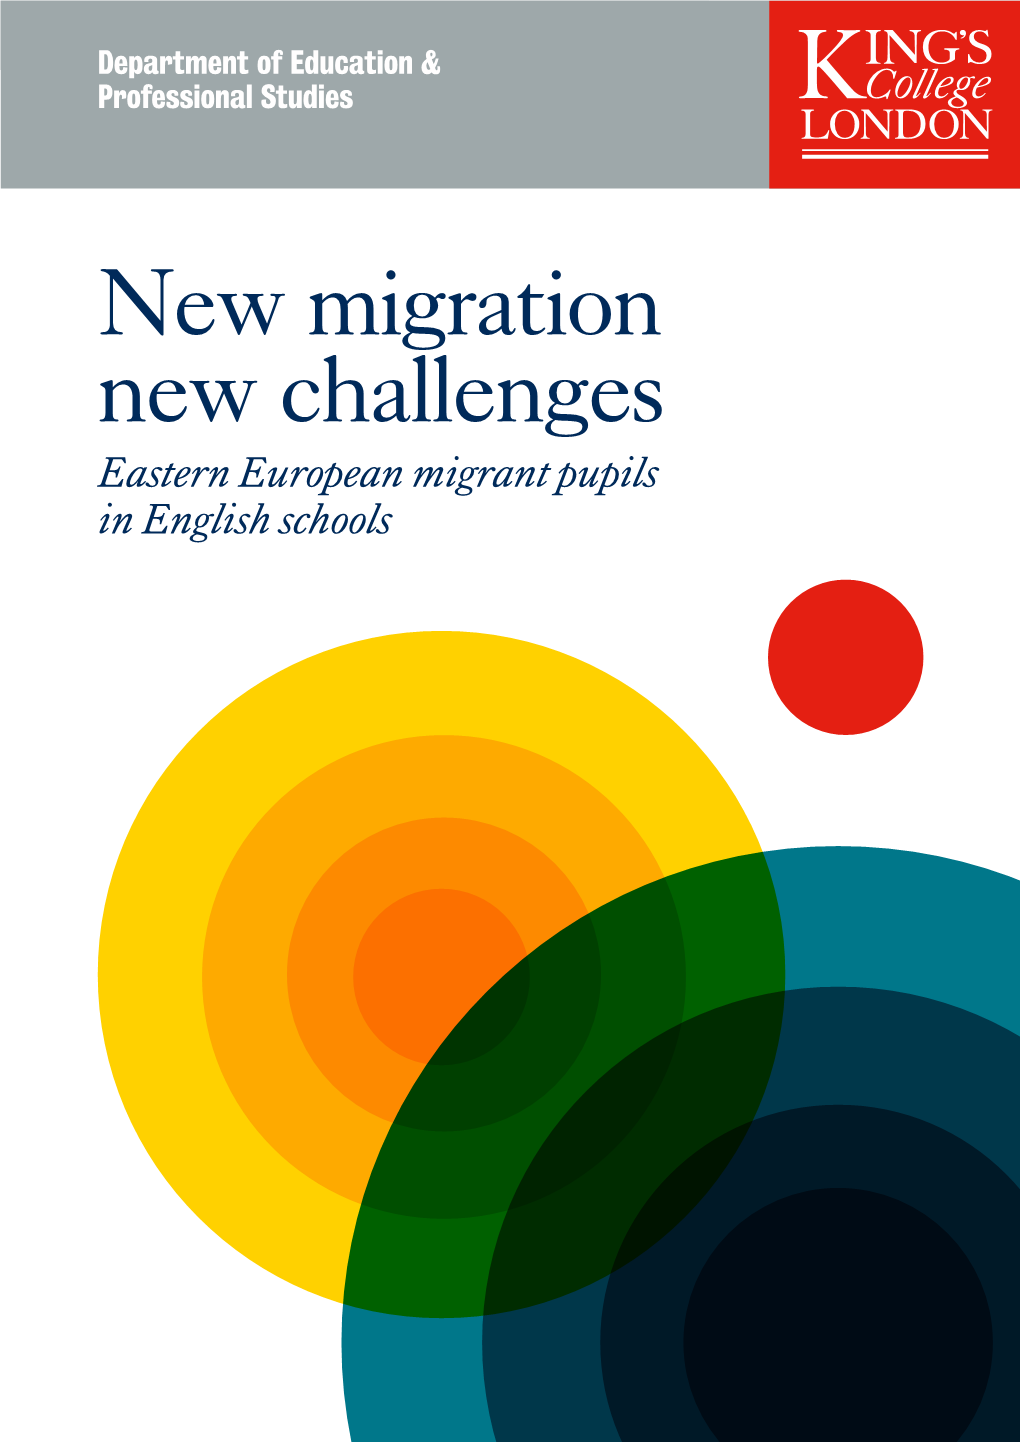 New Migration New Challenges Eastern European Migrant Pupils in English Schools 4 New Migration, New Challenges Eastern European Migrant Pupils in English Schools